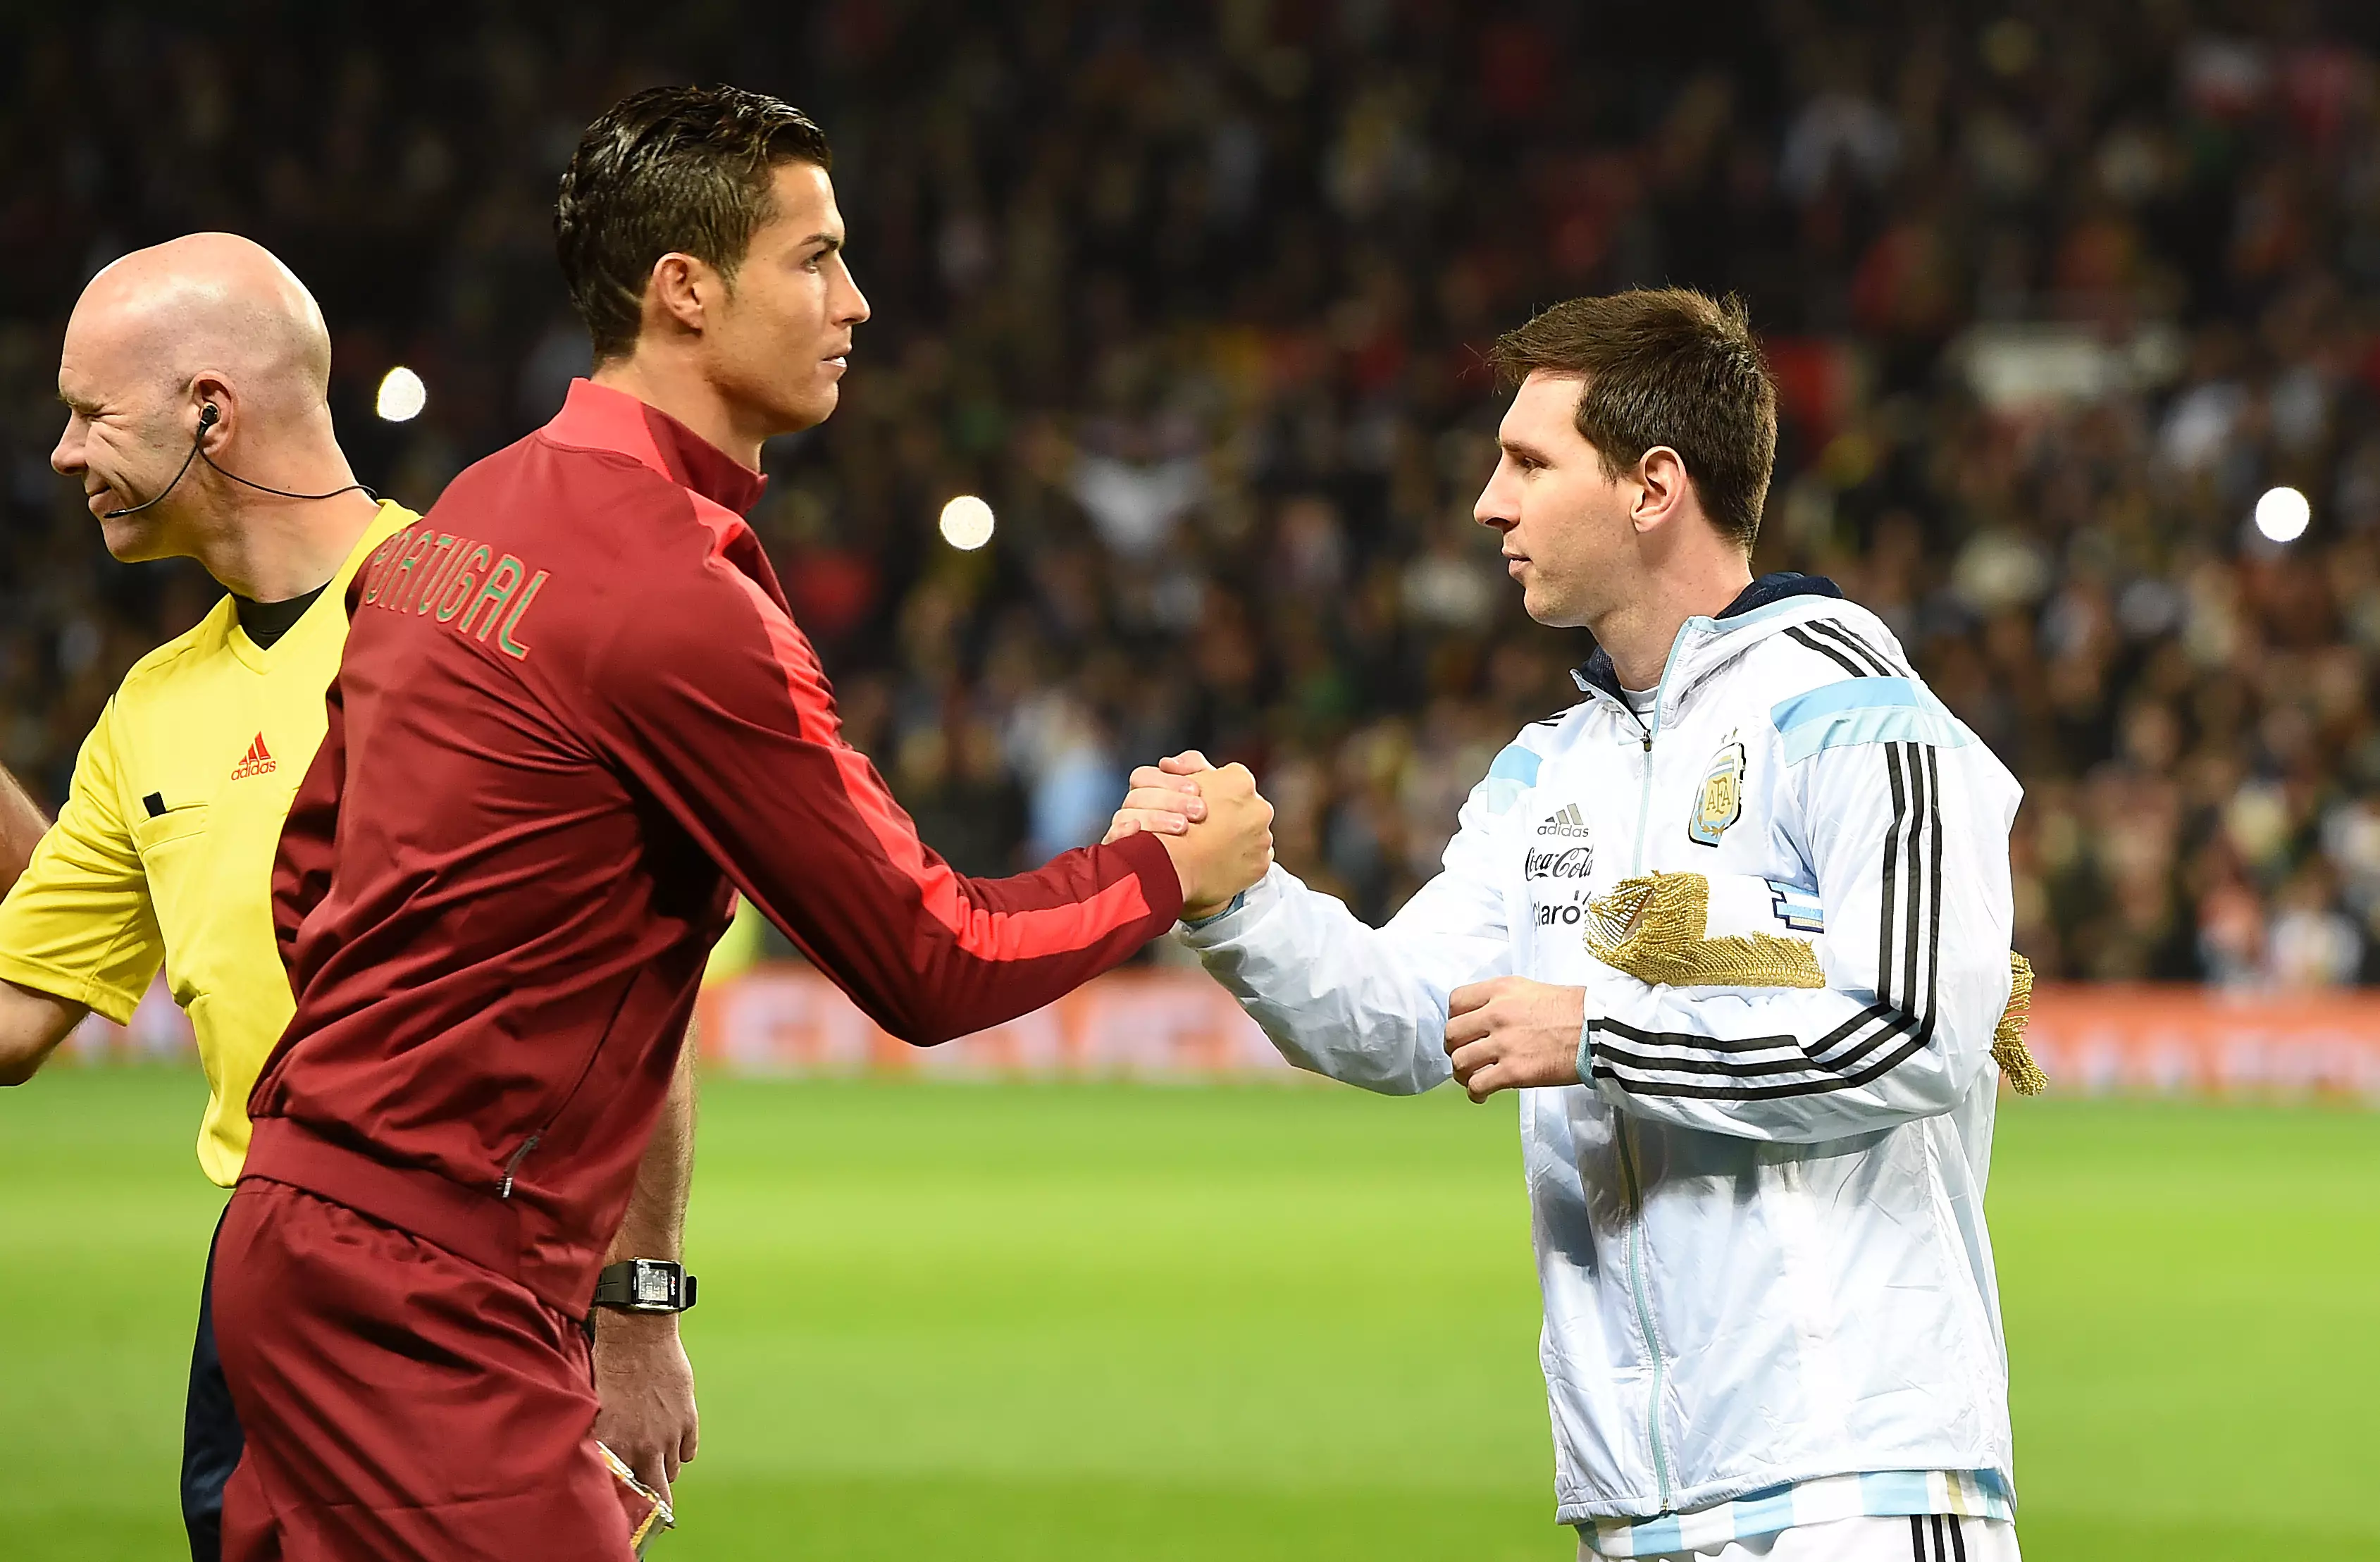 Cristiano Ronaldo And Lionel Messi Didn't Vote For Each Other As The Best